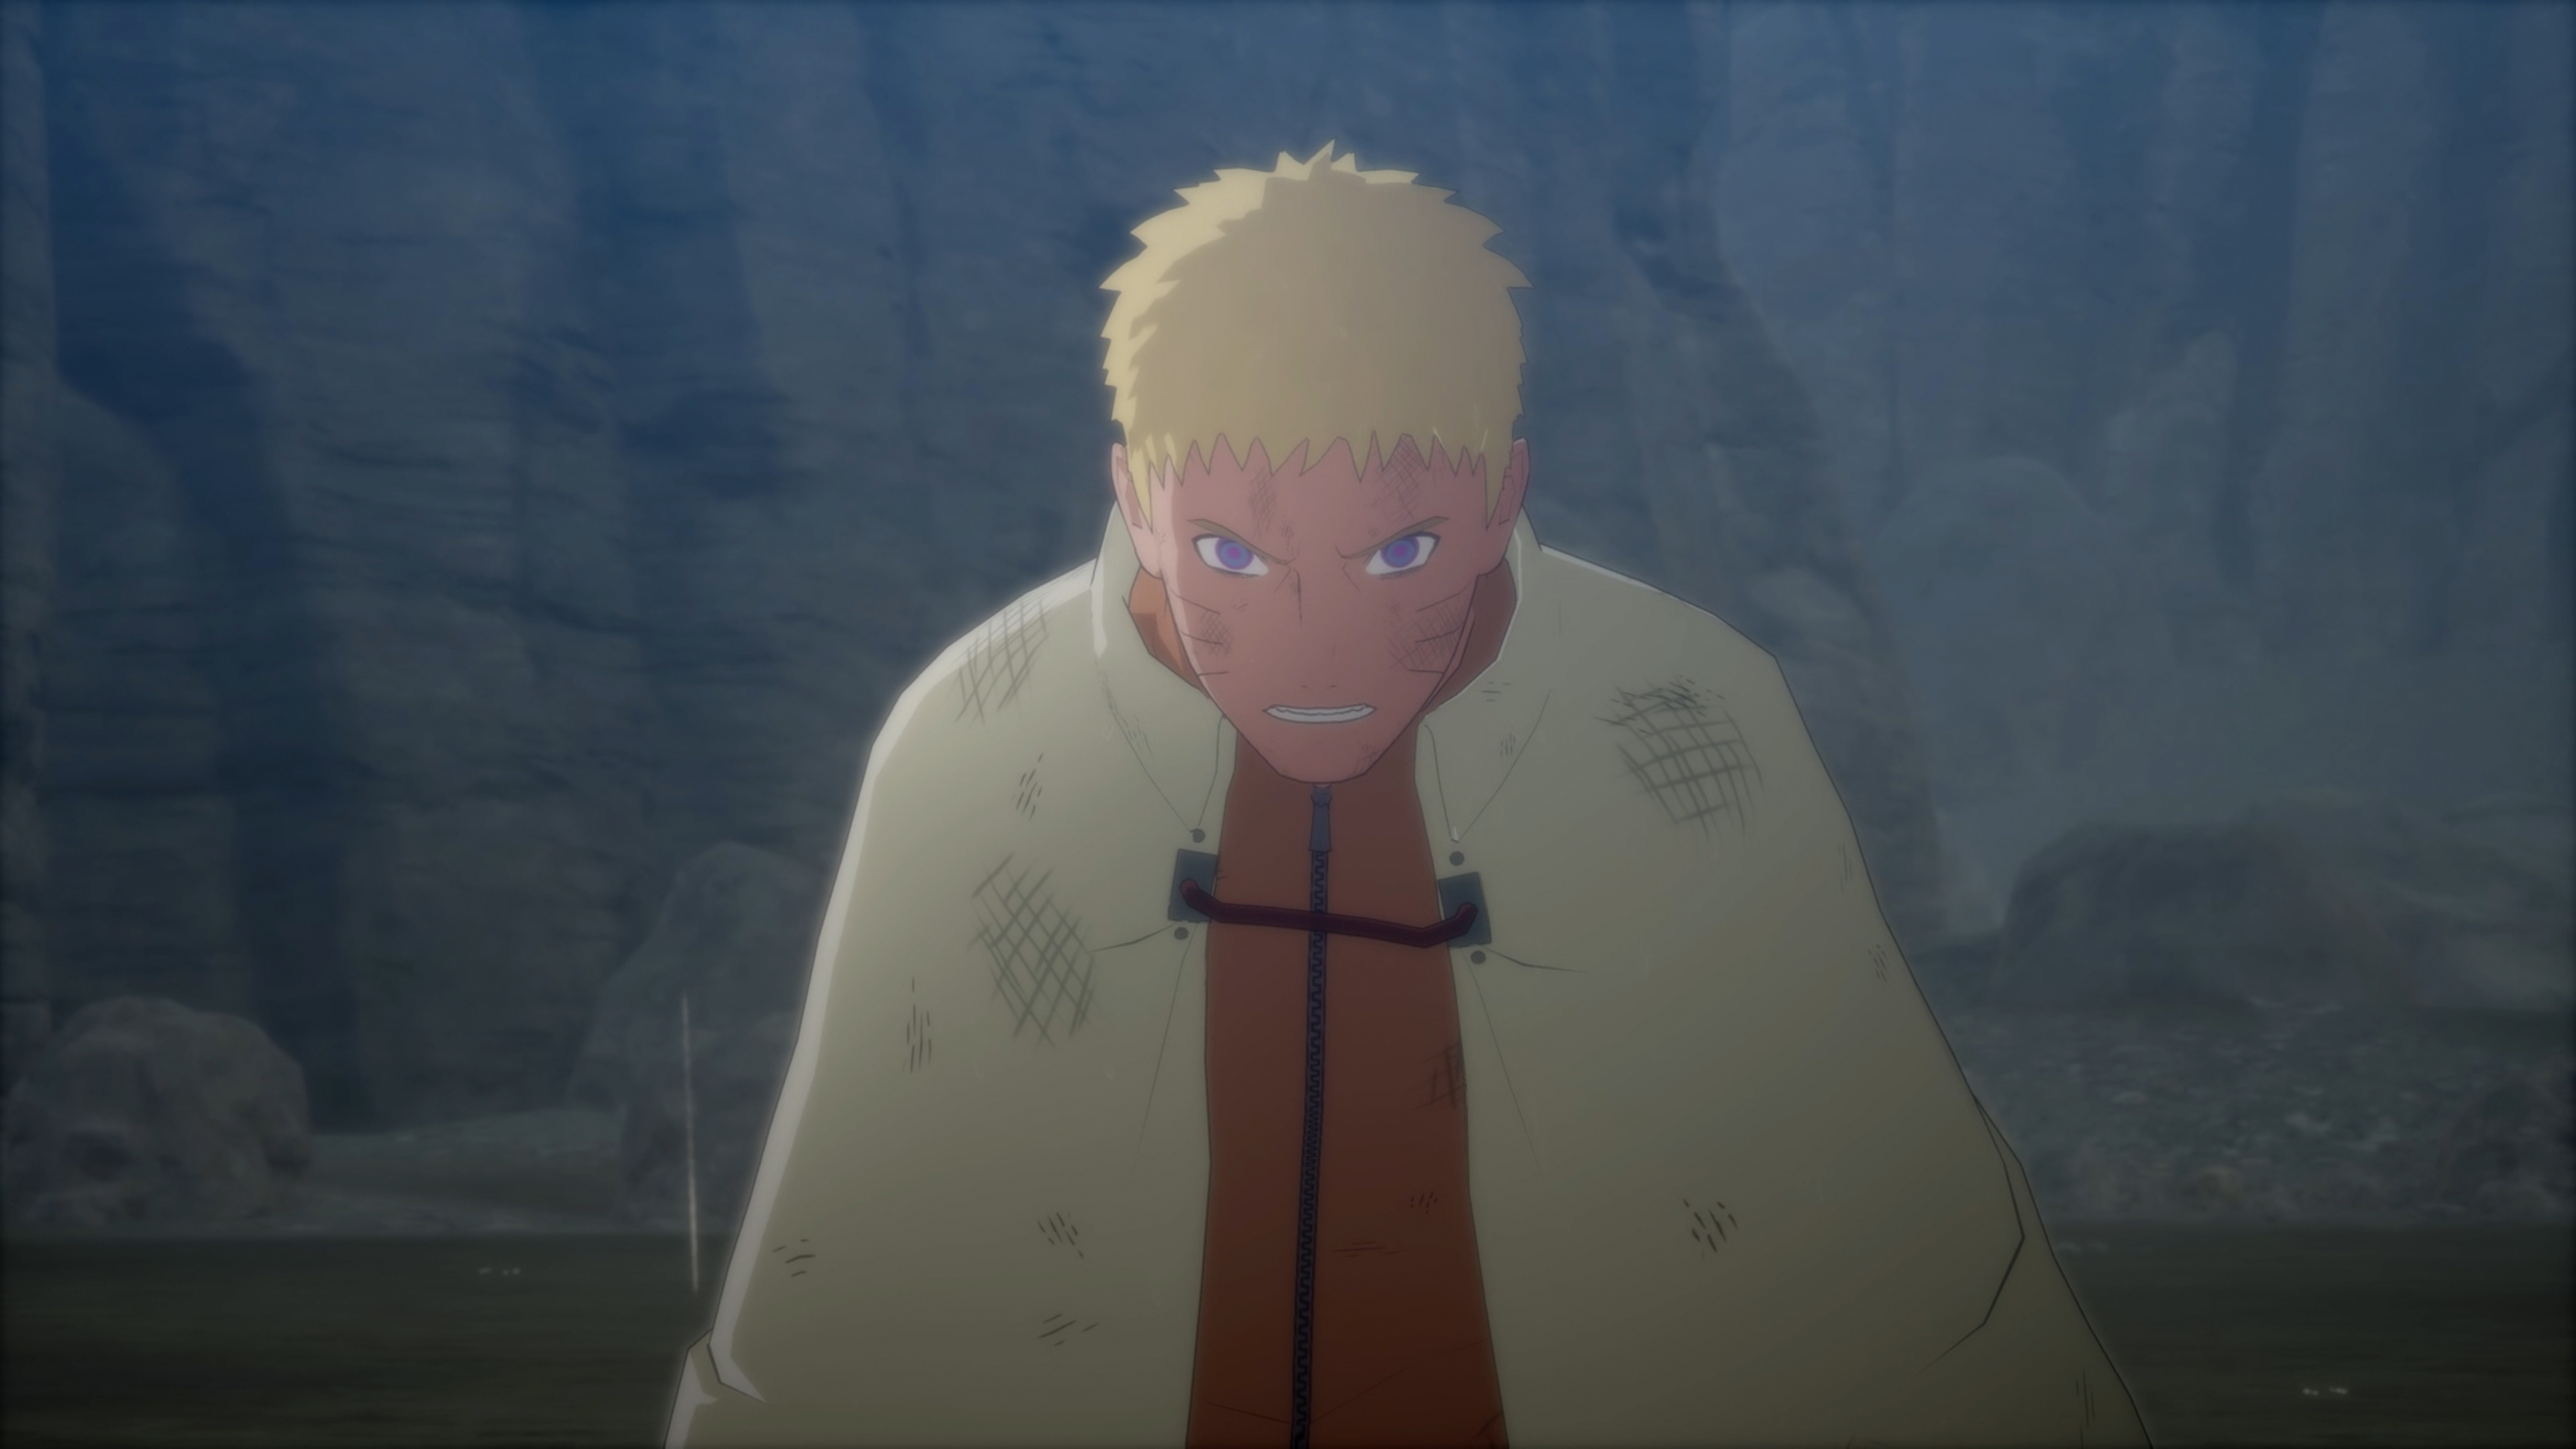 Get a glimpse of the exclusive original story created for NARUTO X BORUTO  Ultimate Ninja STORM CONNECTIONS